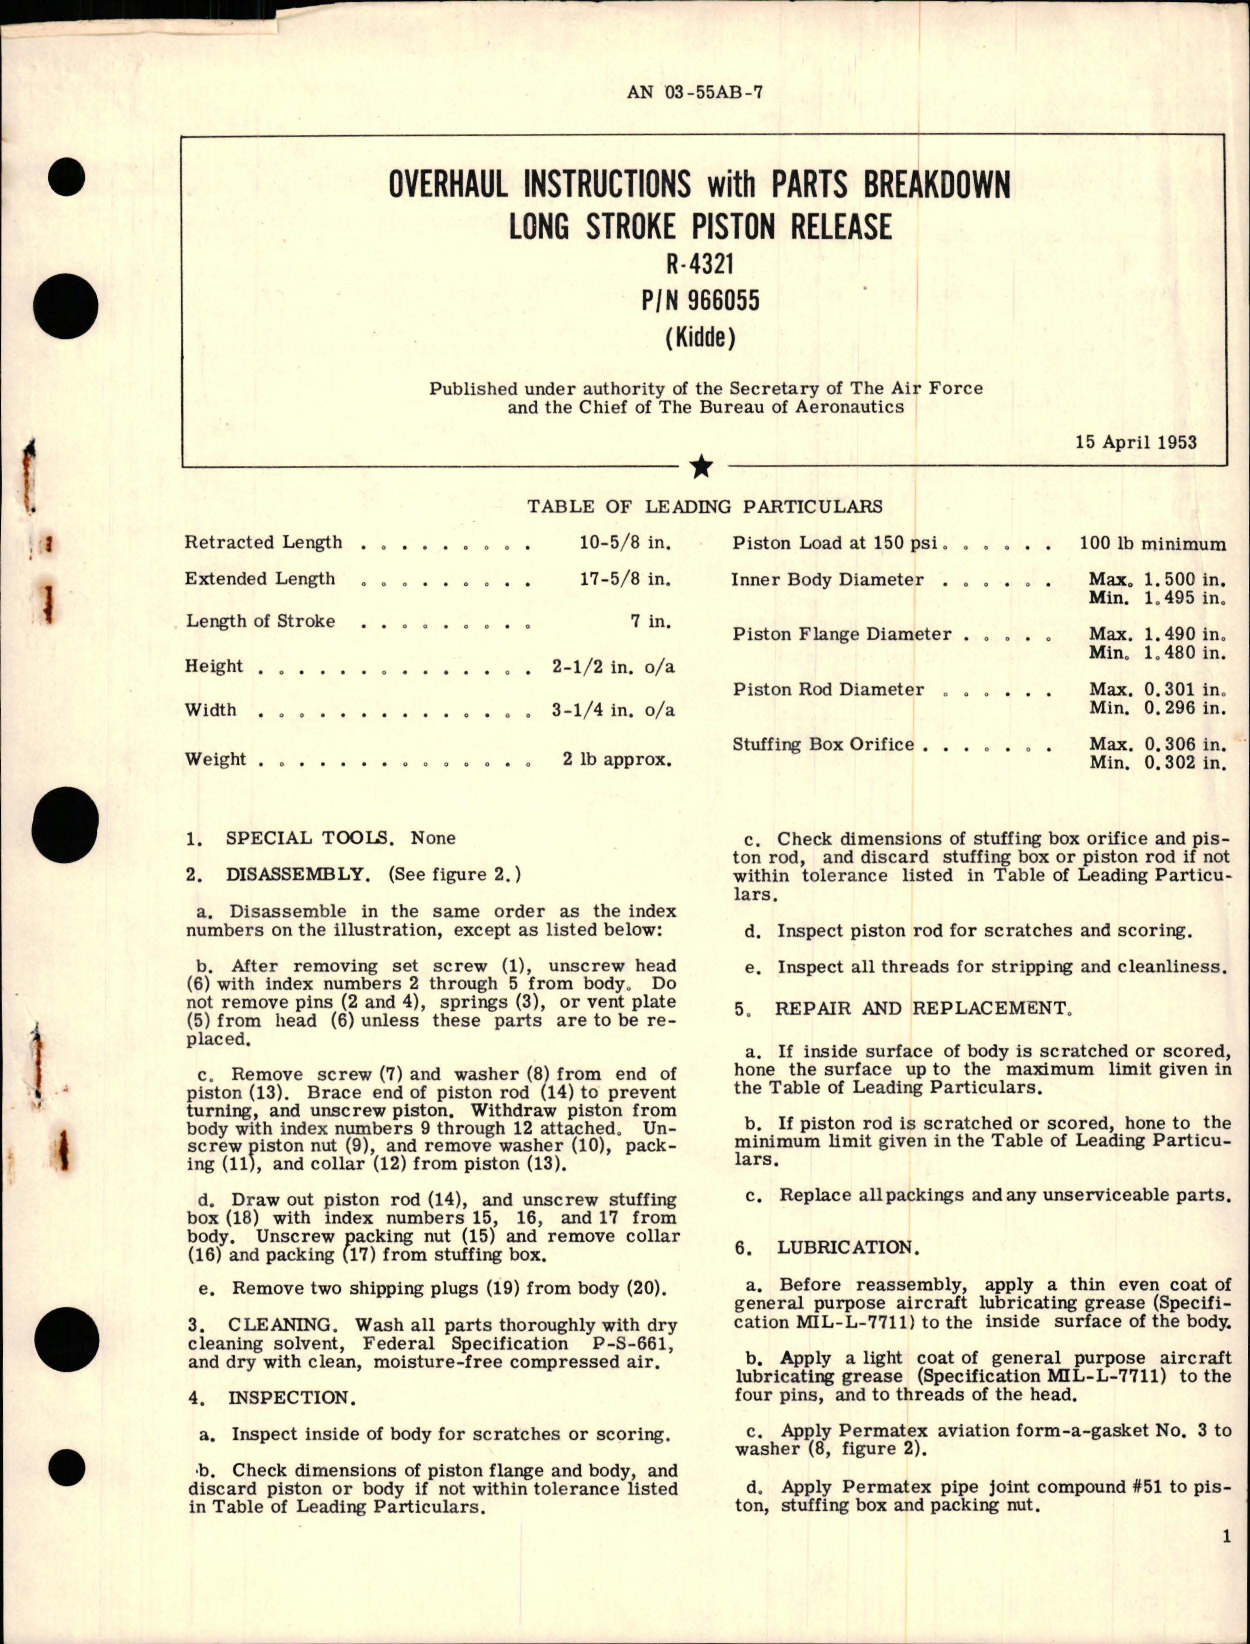 Sample page 1 from AirCorps Library document: Overhaul Instructions with Parts Breakdown for Long Stroke Piston Release - R-4321